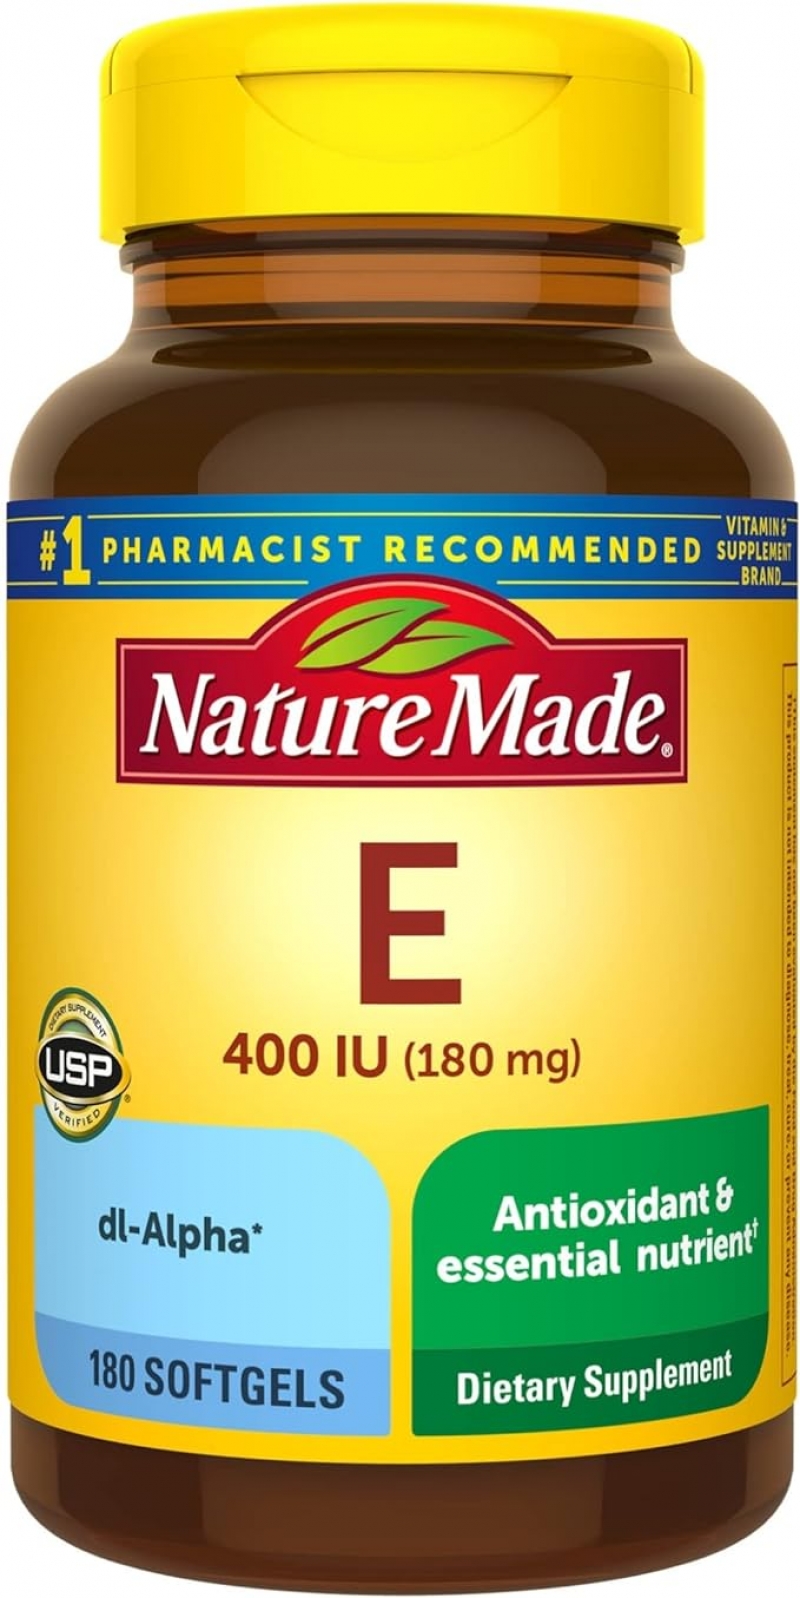 ihocon: Nature Made Vitamin E 180 mg (400 IU) dl-Alpha, Dietary Supplement for Antioxidant Support, 180粒